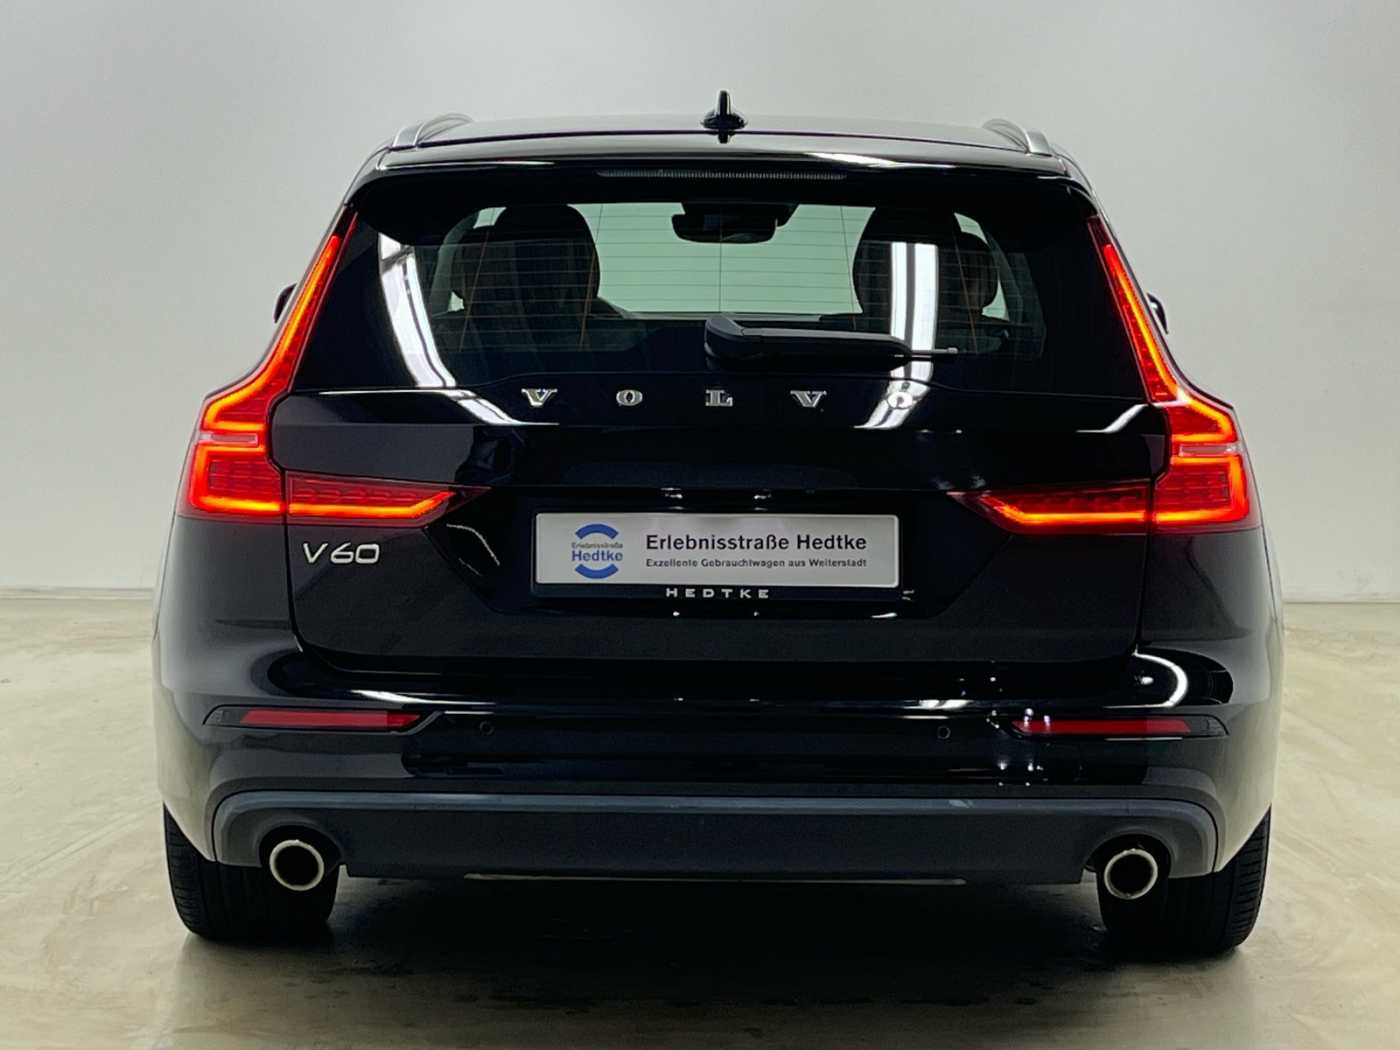 Volvo  V60 T6 TWIN ENGINE AWD Automatikgetriebe (186+65kW/253+87PS) Momentum Pro